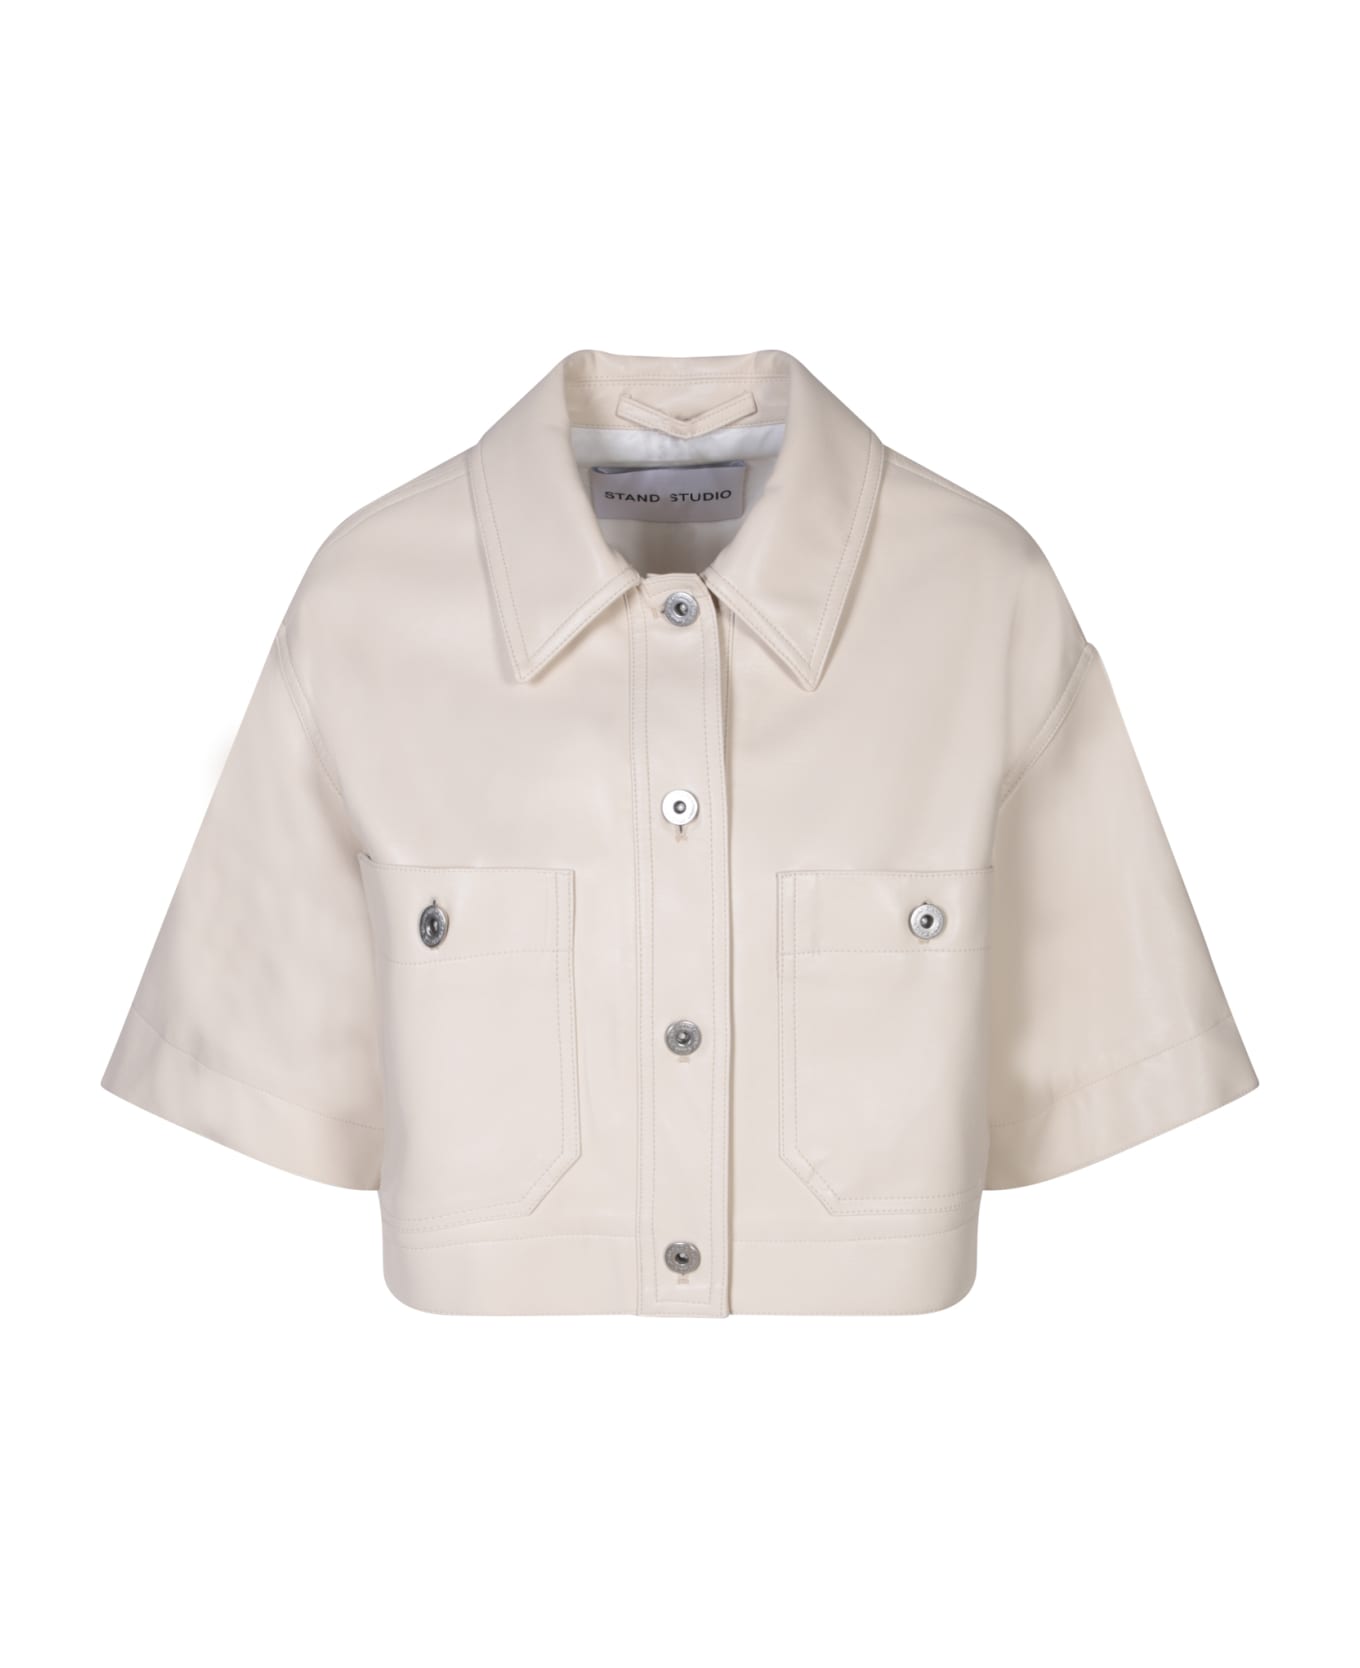 STAND STUDIO Ivory Faux Leather Shirt By Stand Studio - White シャツ